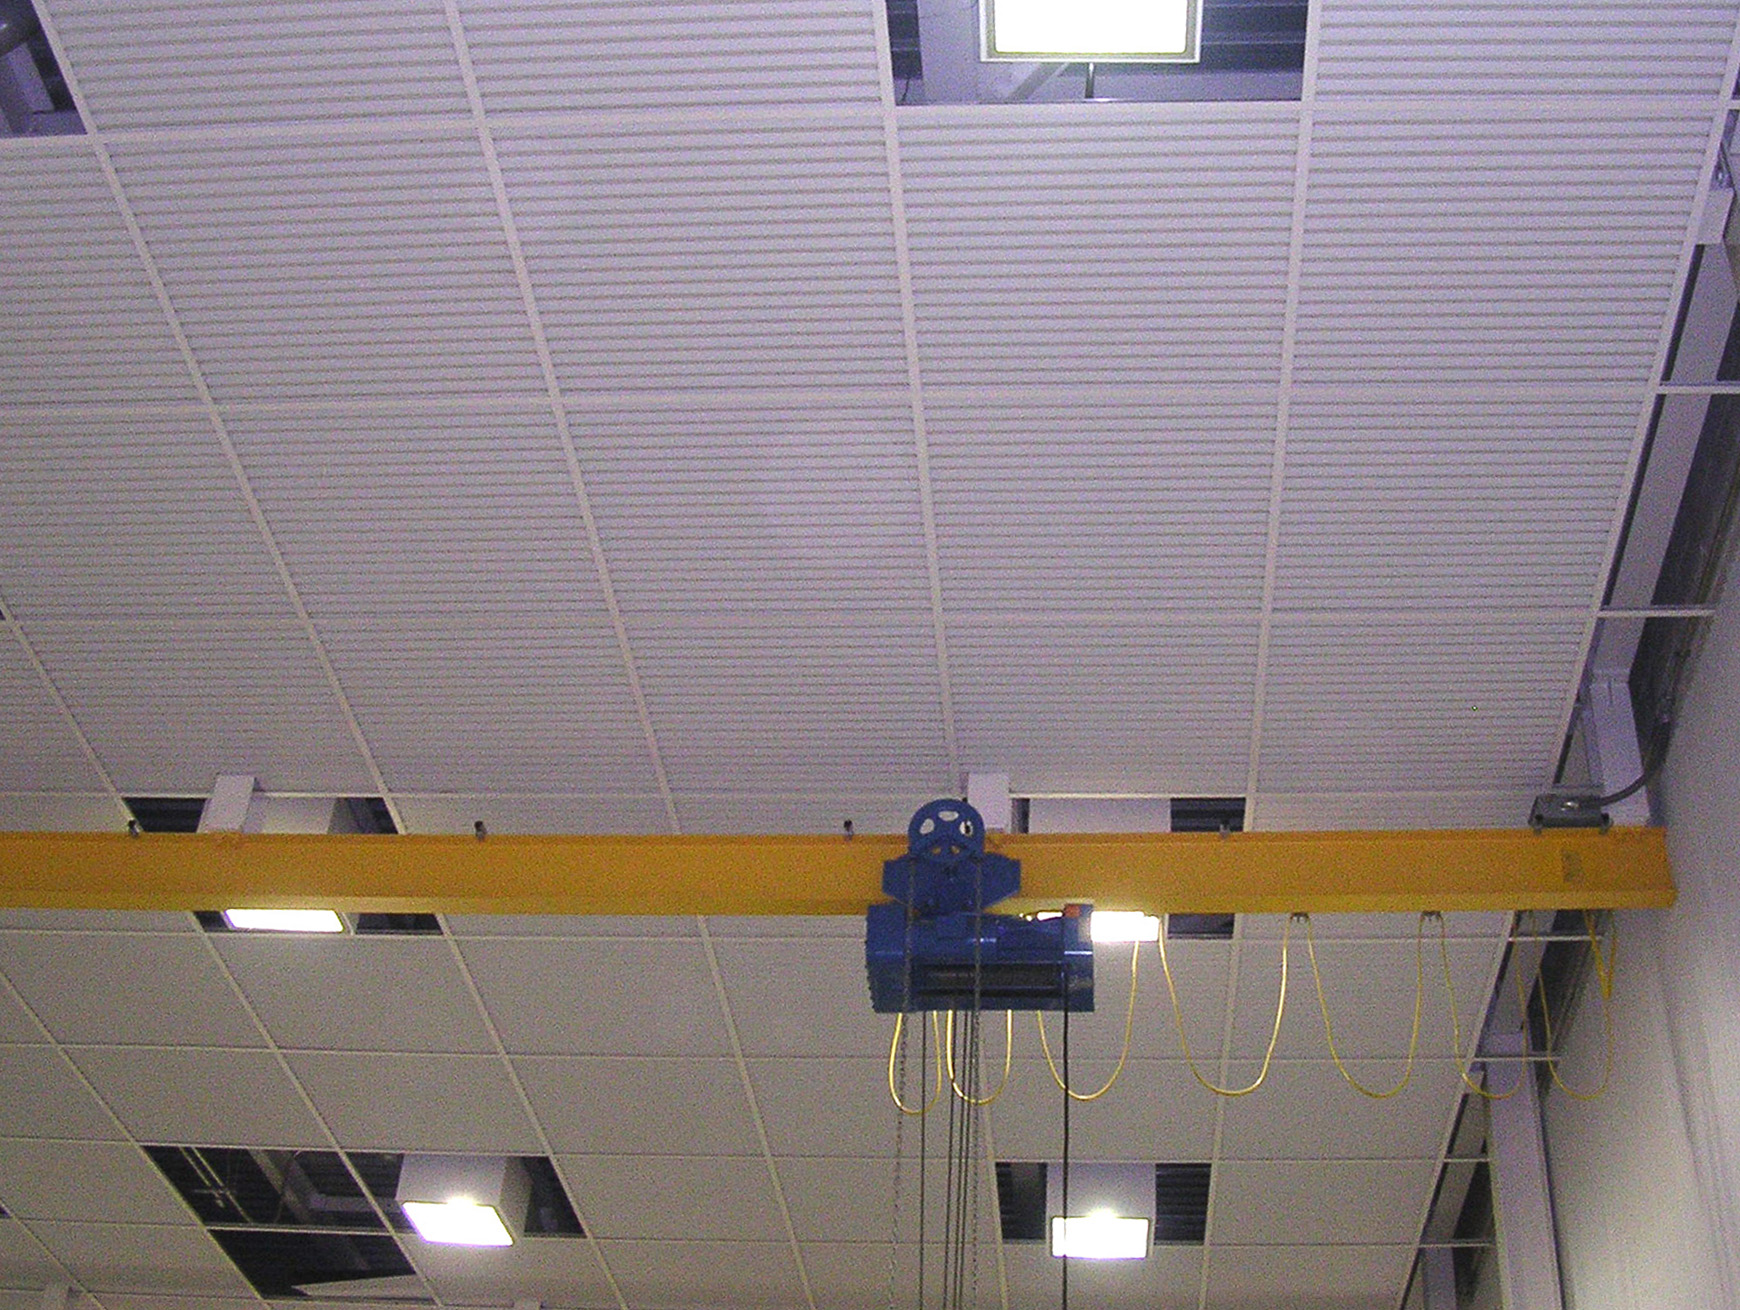 2ft x 4ft Ripple Grid Corrugated Metal Lay-In Tile Ceiling System